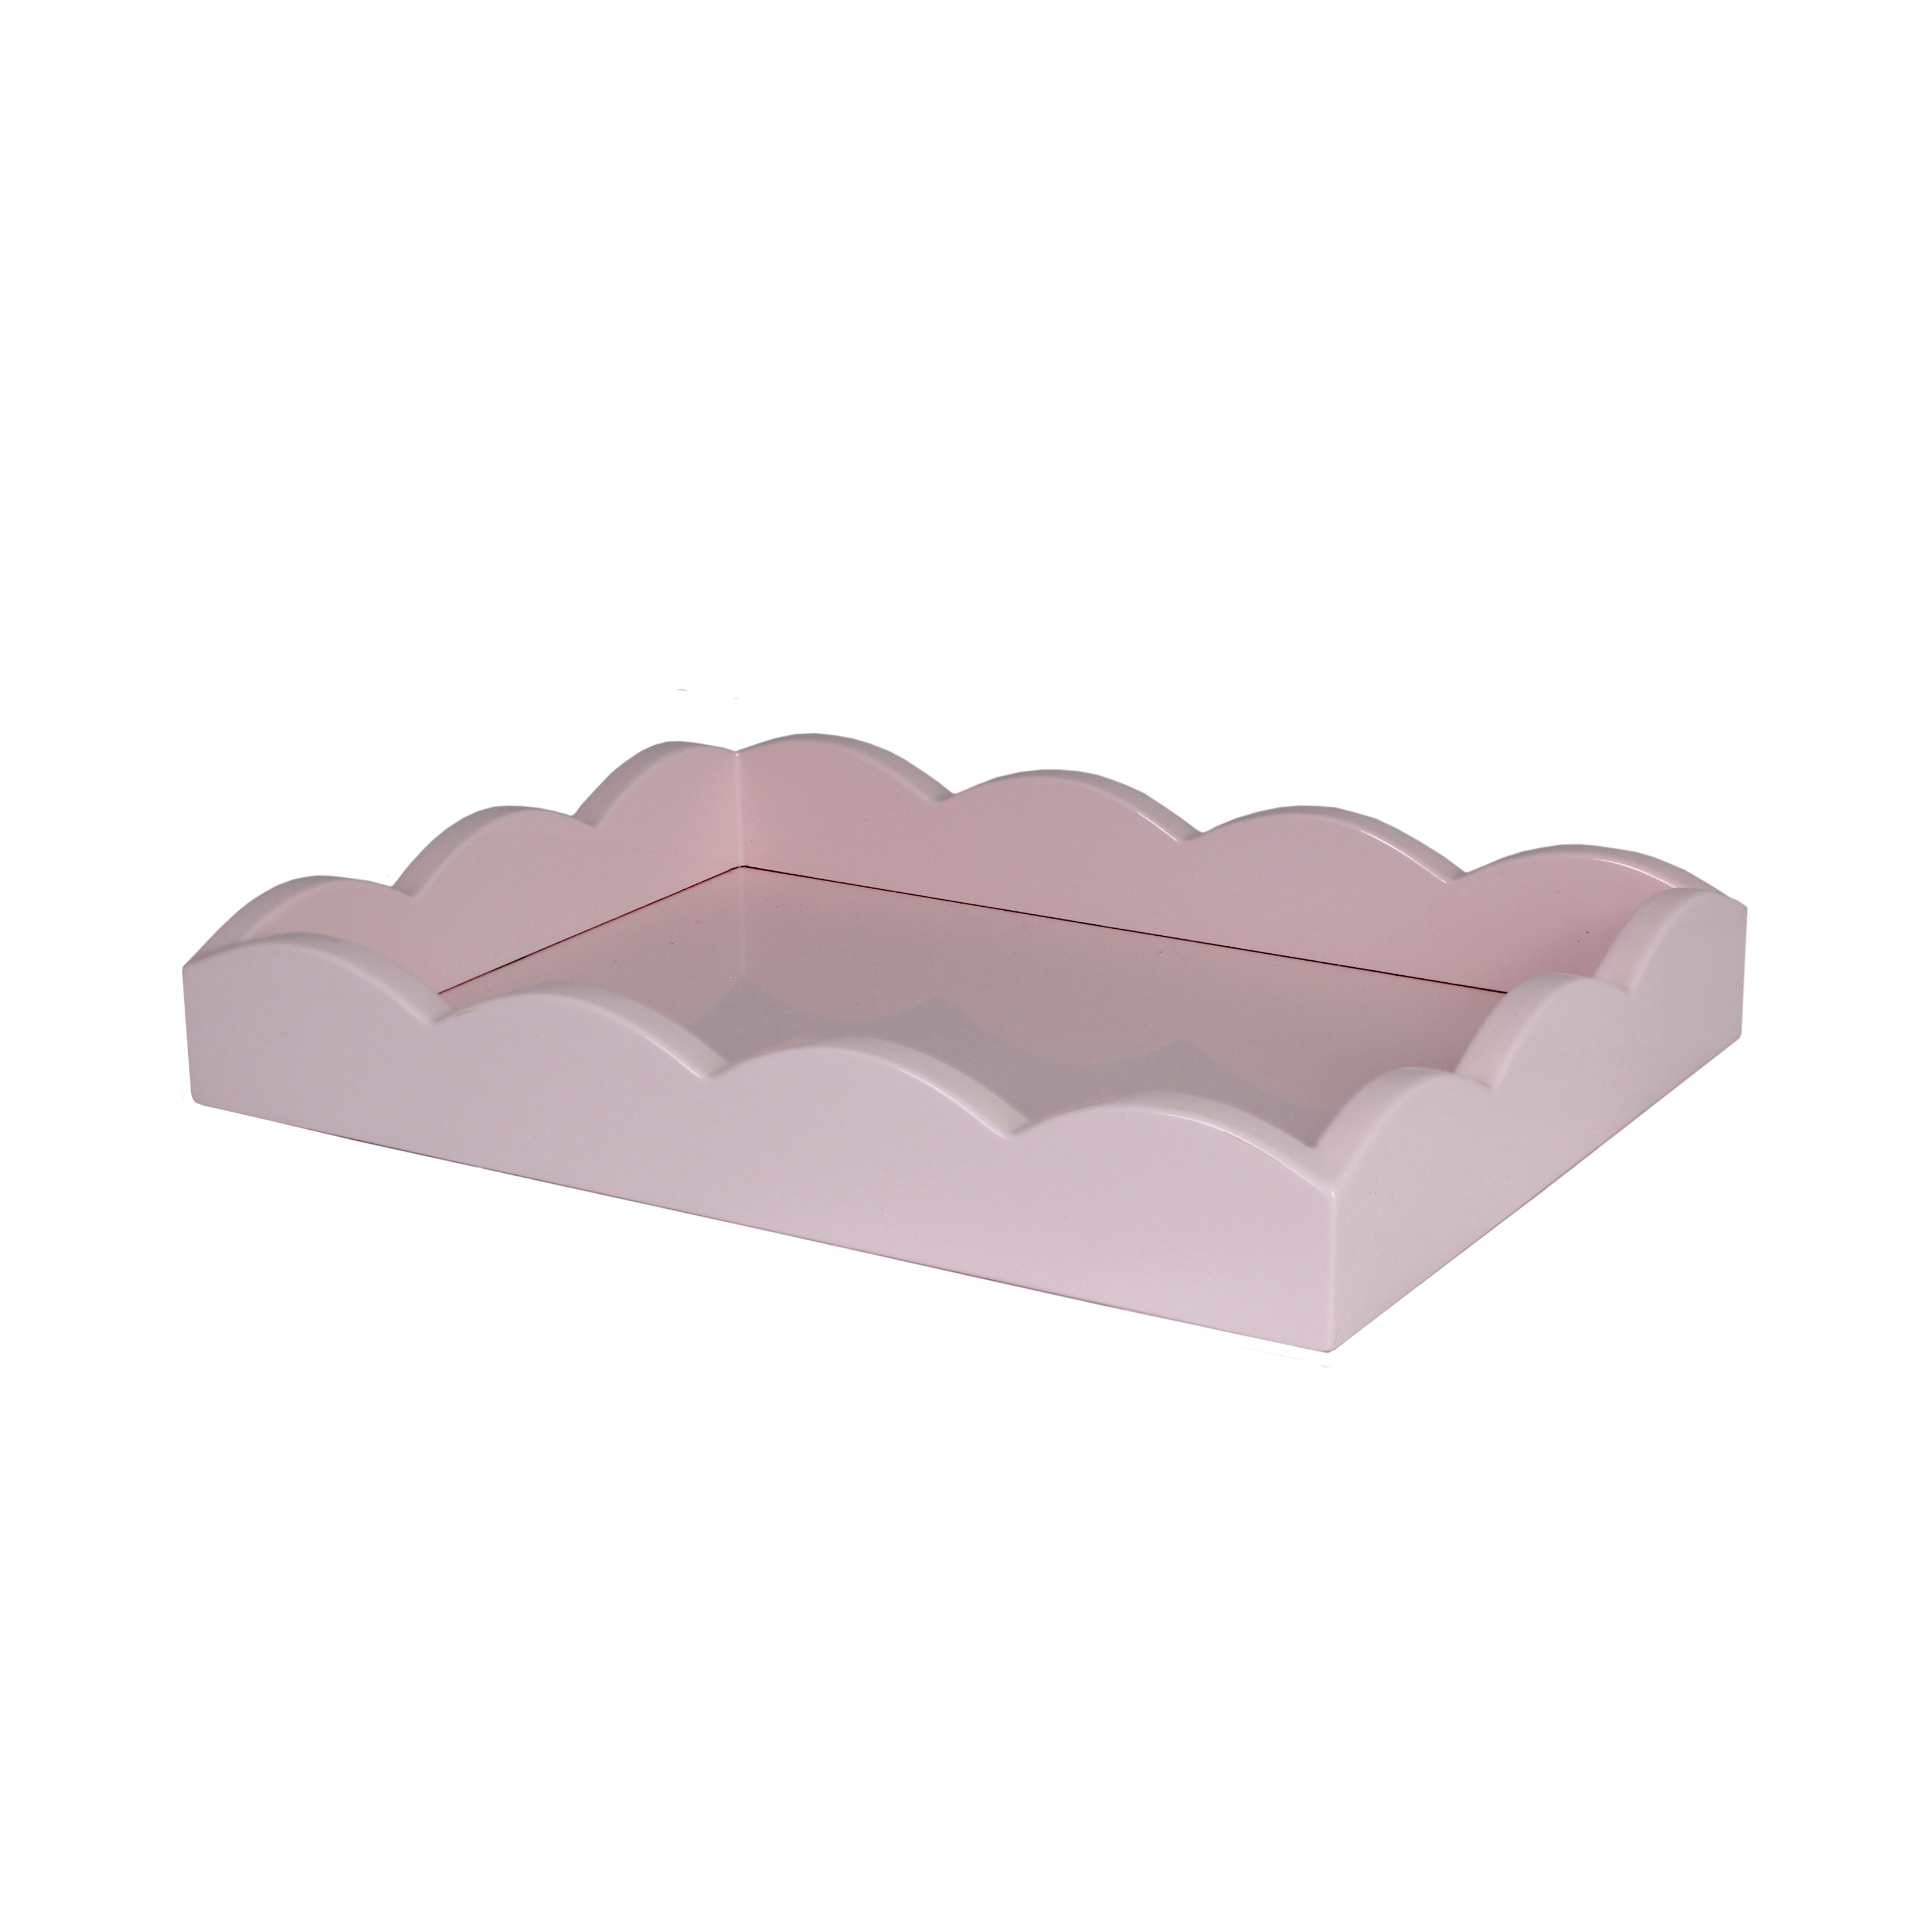 Small pale pink scalloped tray